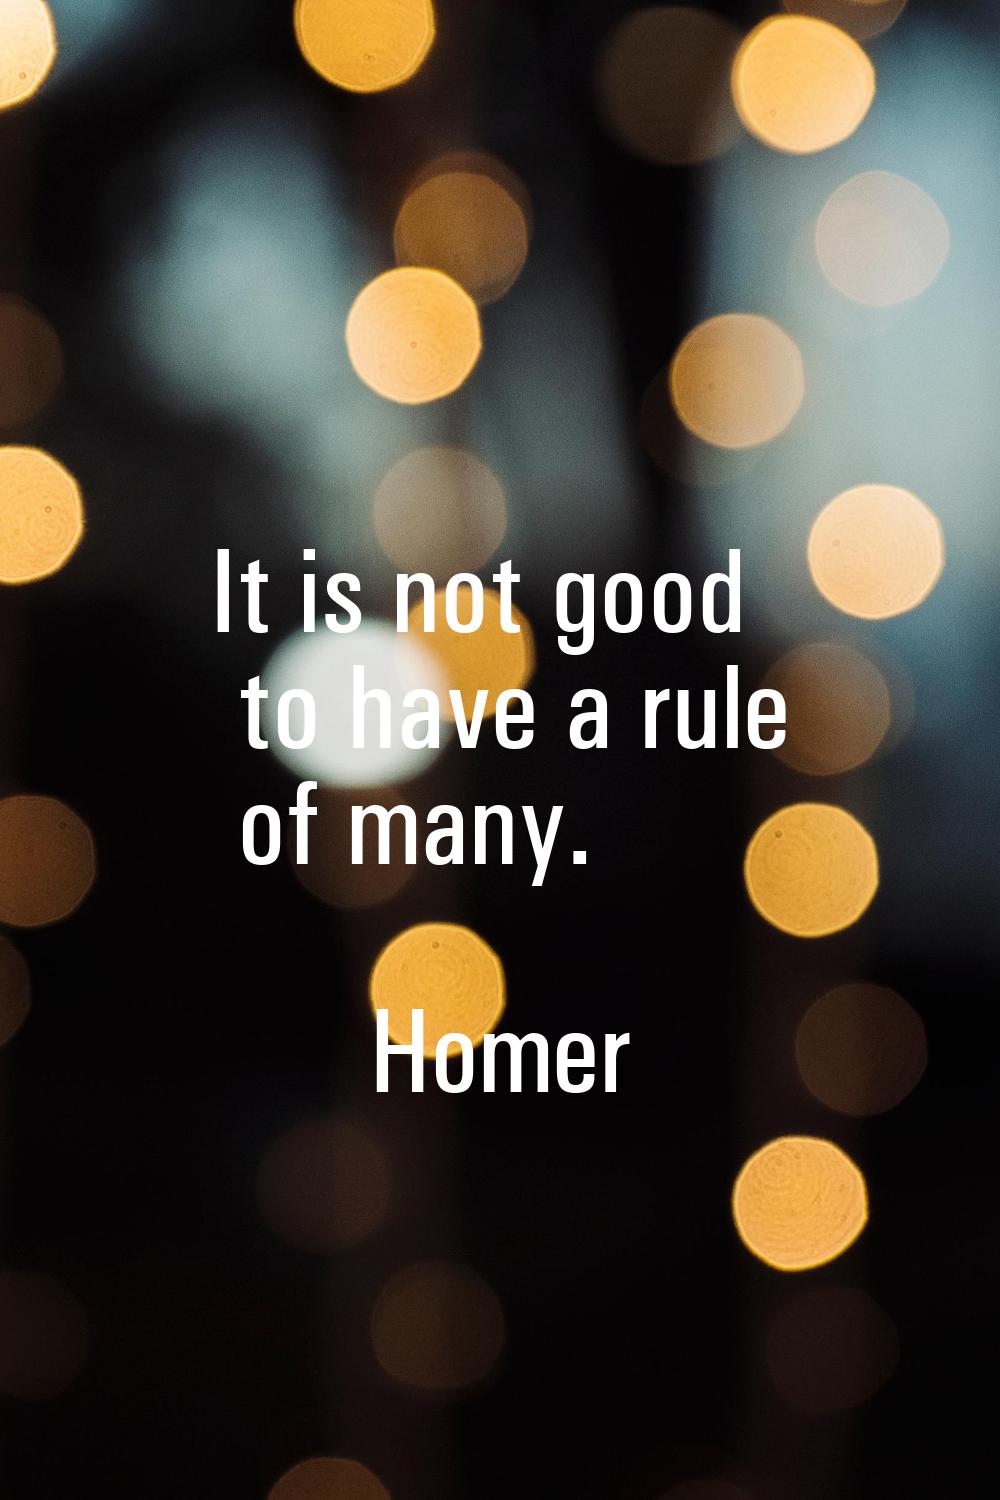 It is not good to have a rule of many.